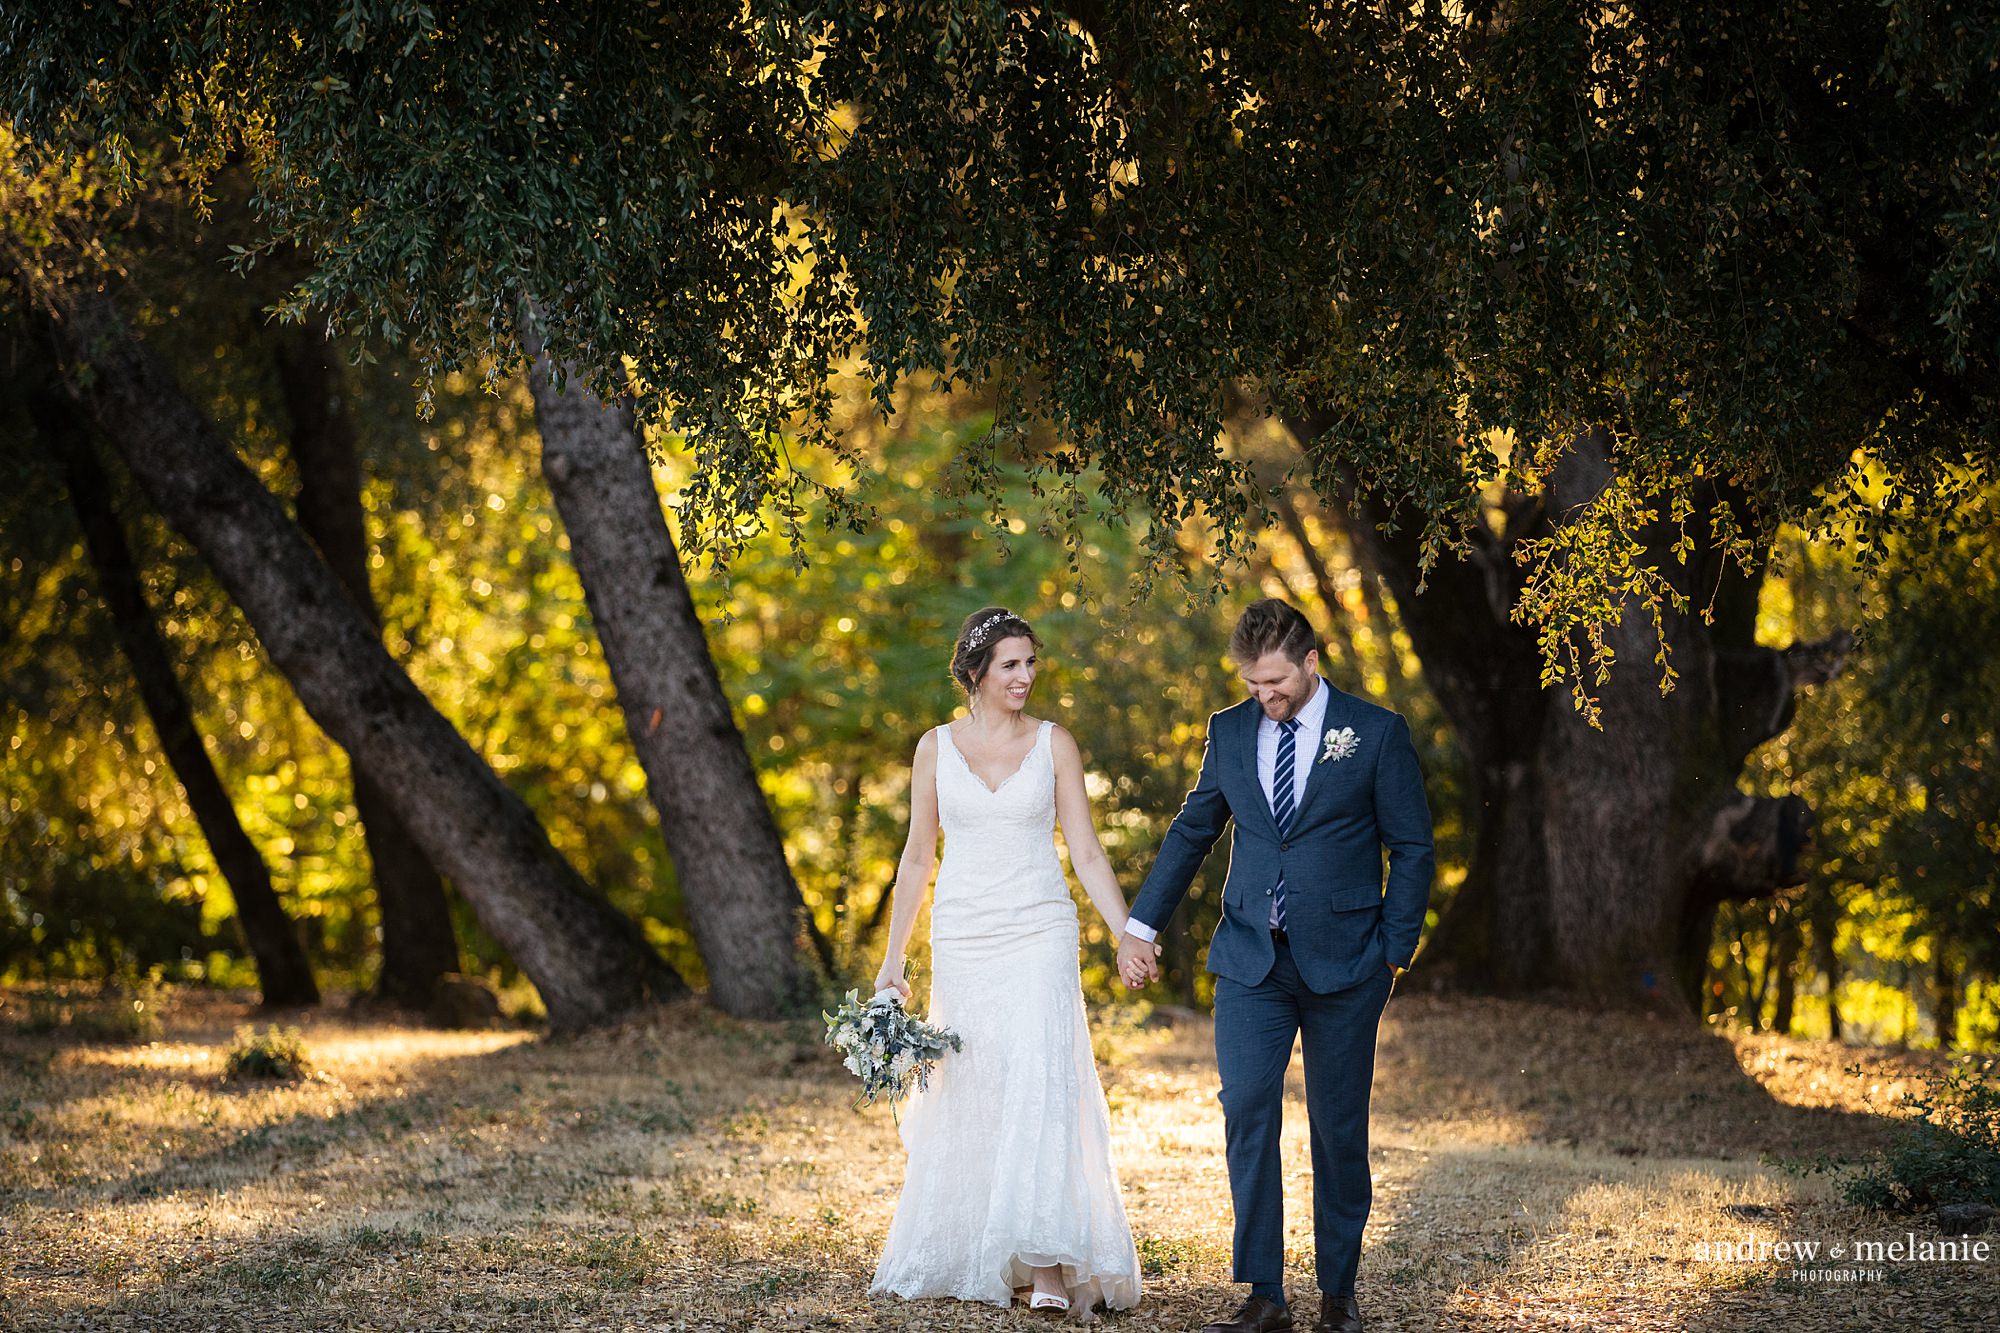 Andrew and Melanie Photography wedding highlights